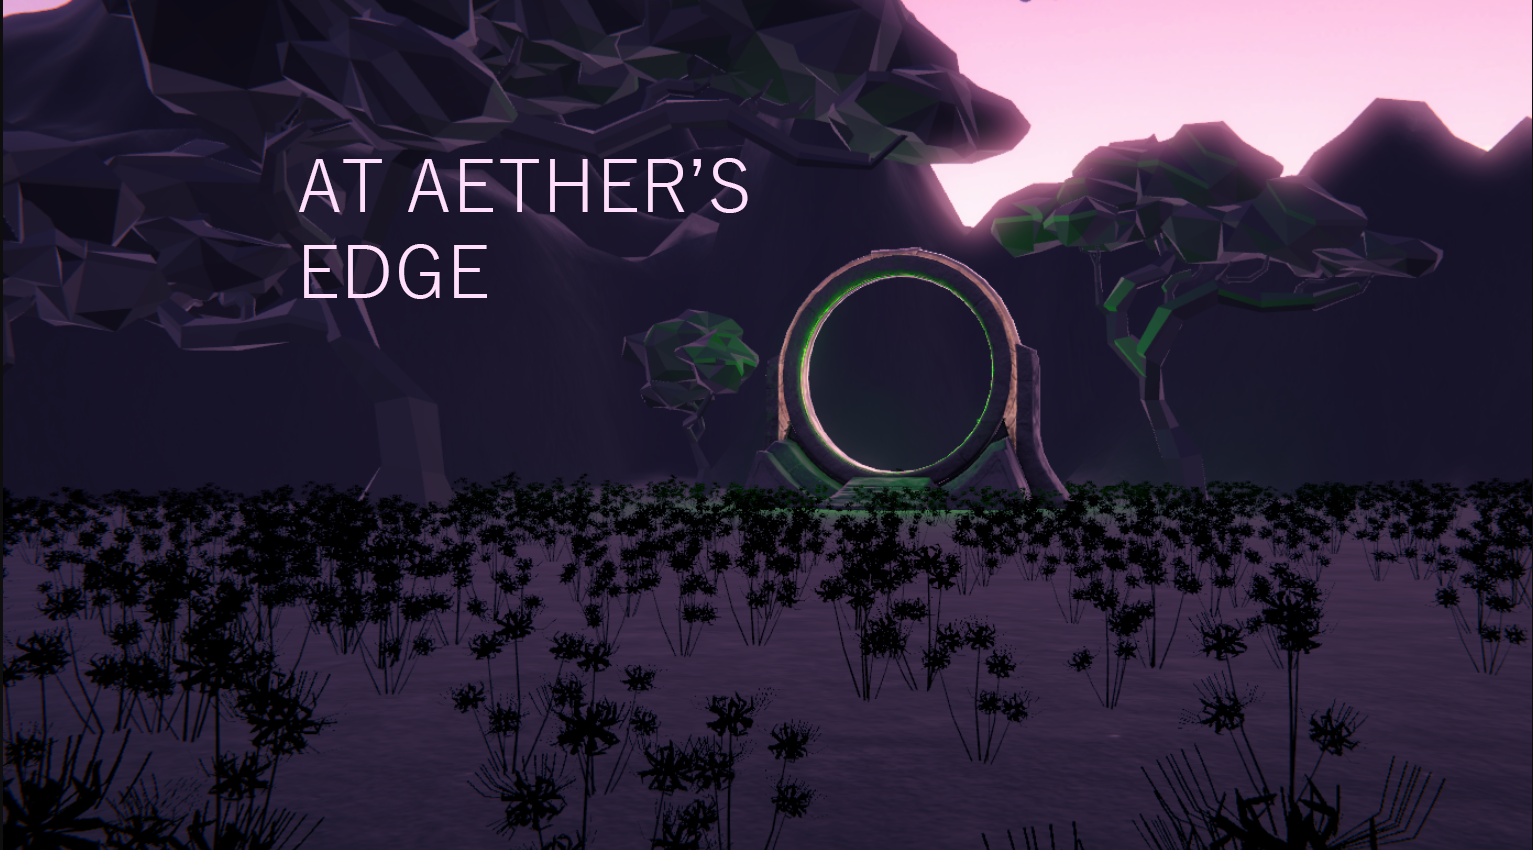 At Aether's Edge